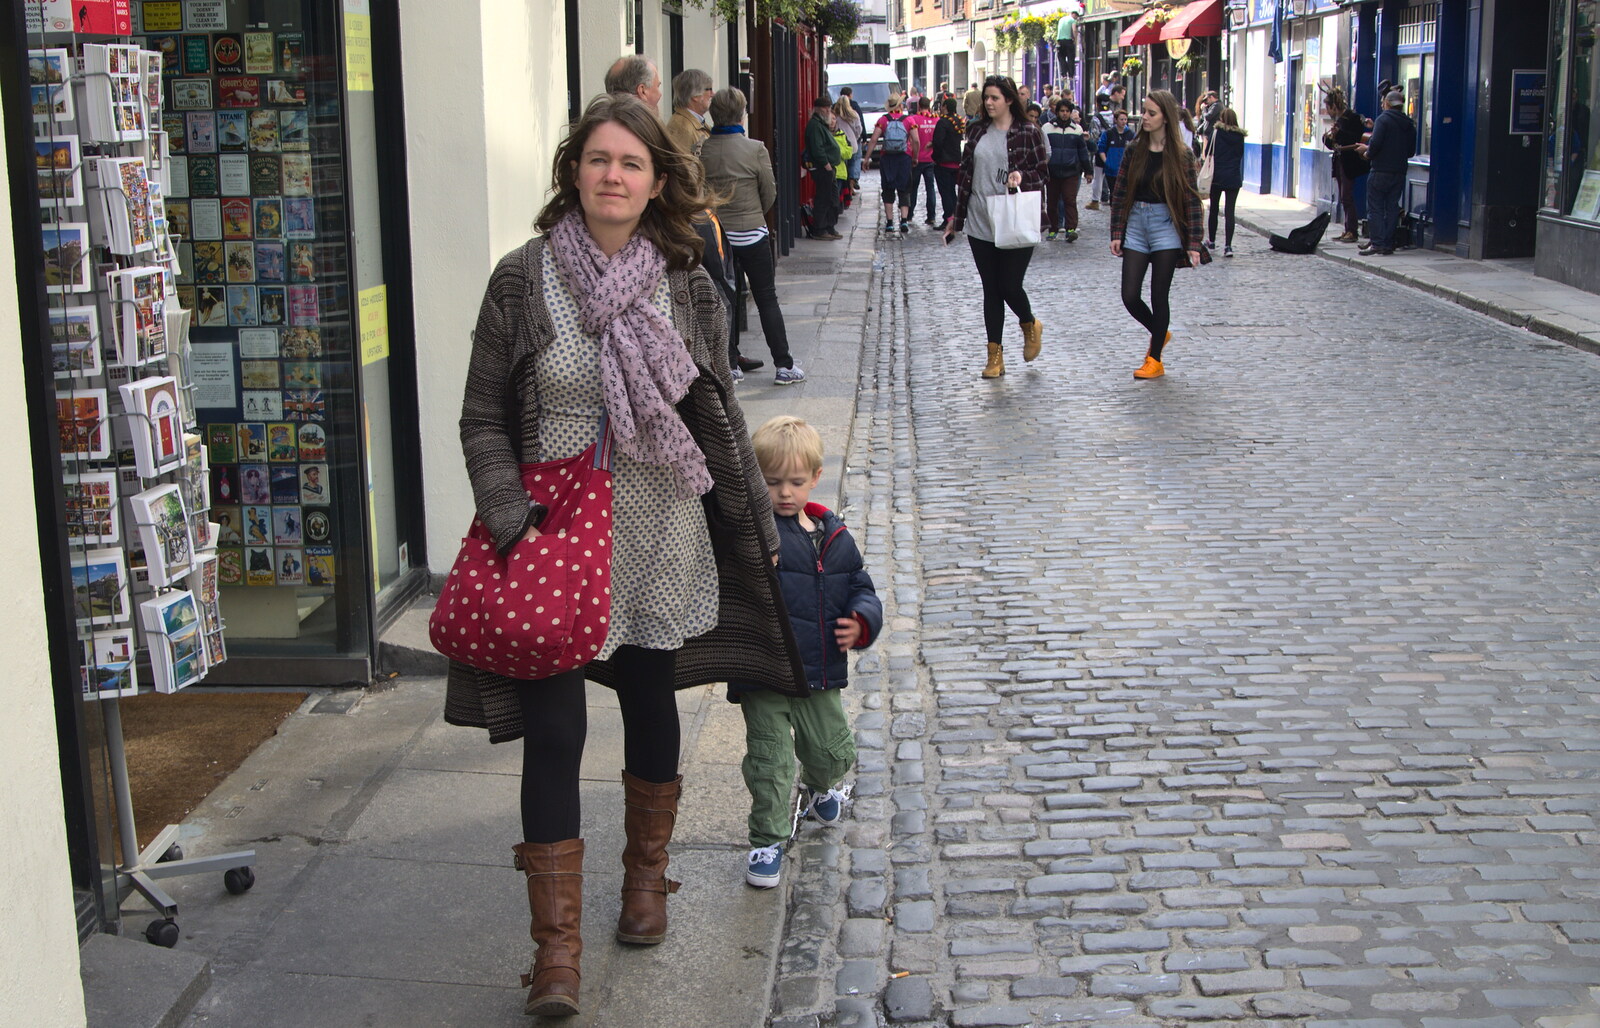 Isobel and Harry from Temple Bar and Dun Laoghaire, Dublin, Ireland - 16th April 2015